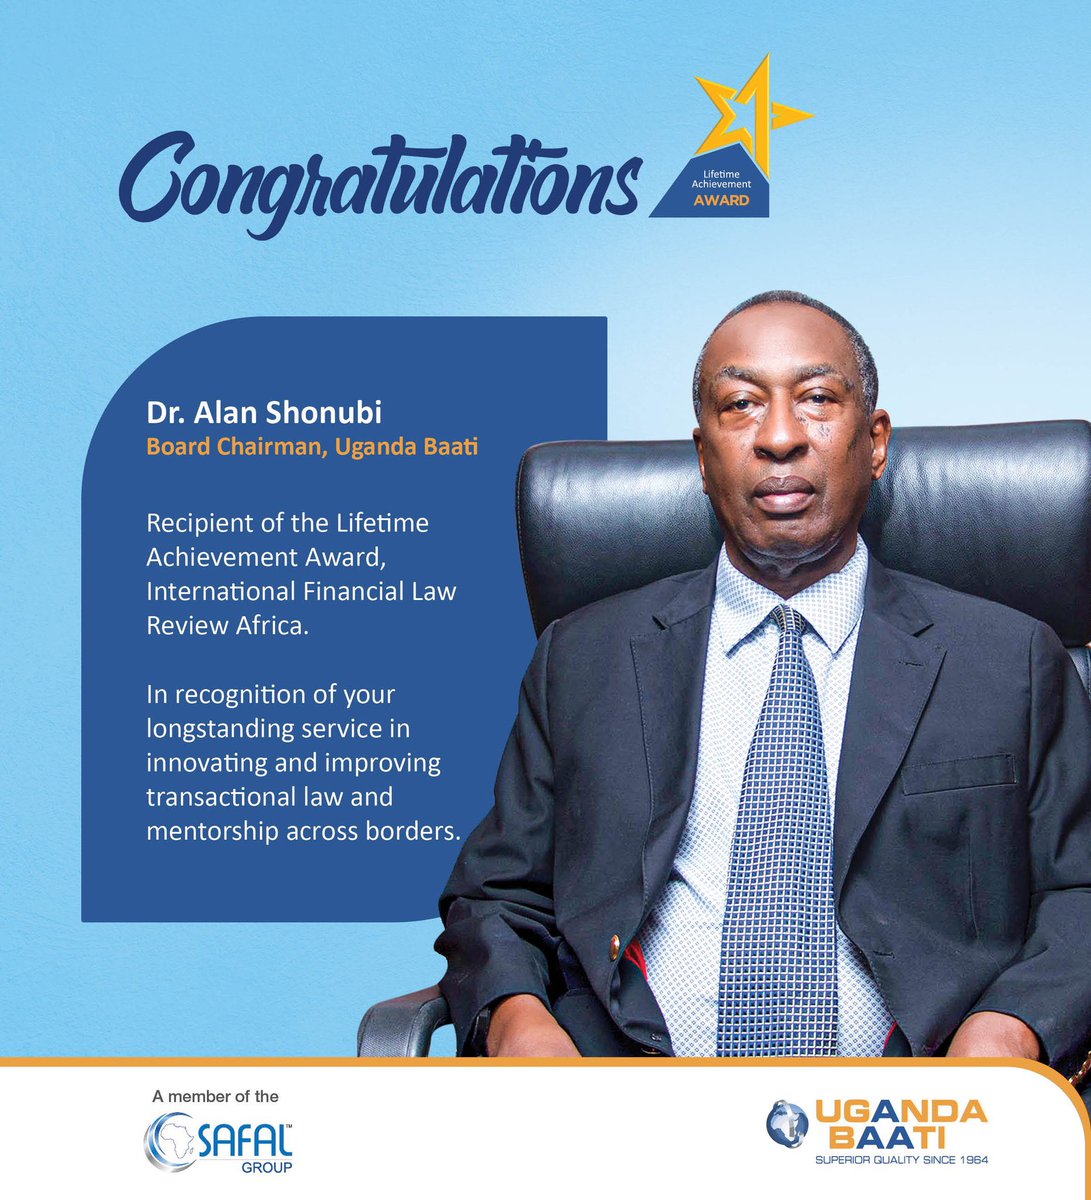 Congratulations to my Board Chairman. We celebrate you